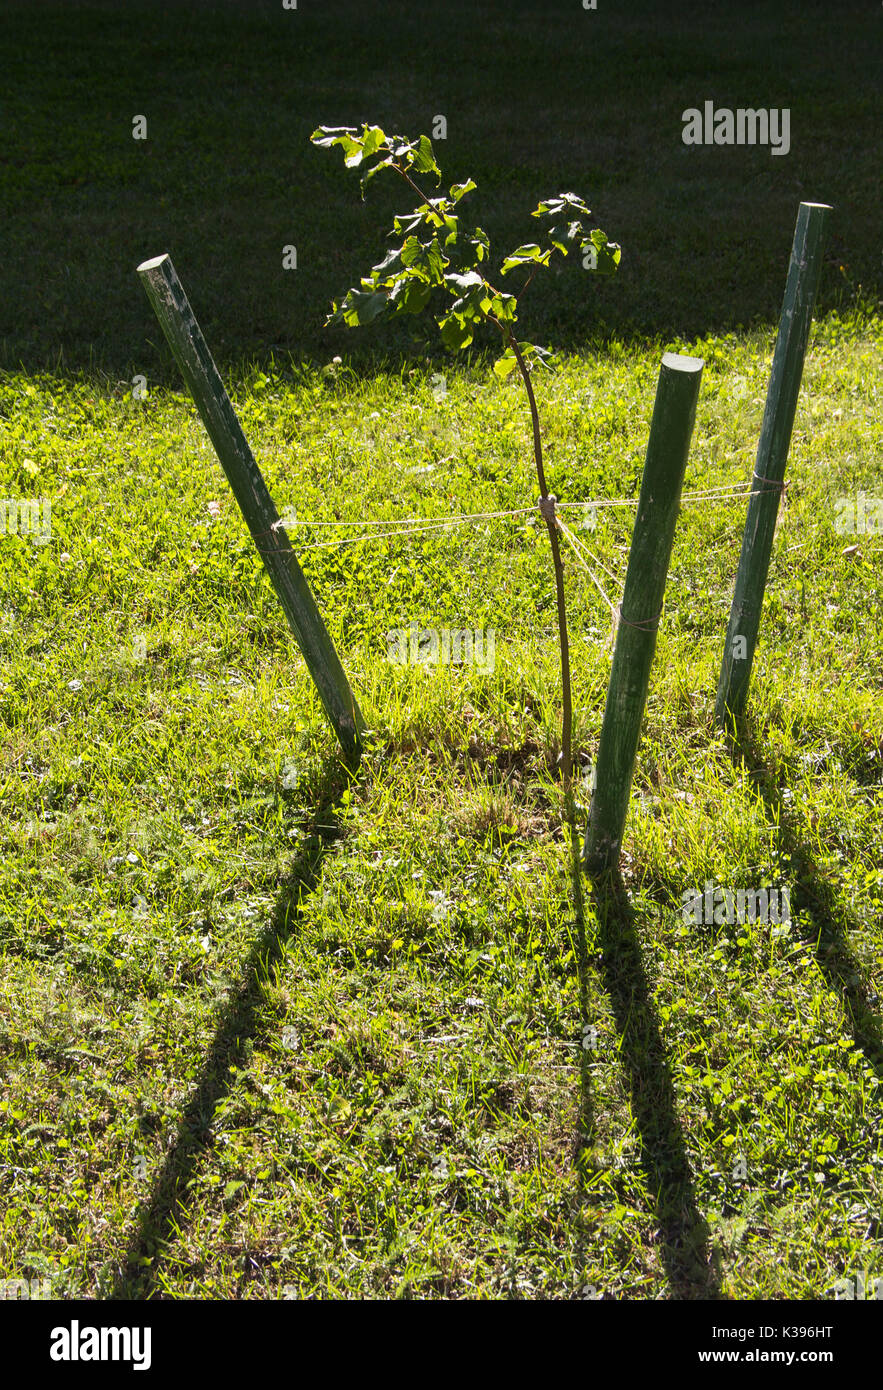 sapling three tied up to support sticks Stock Photo